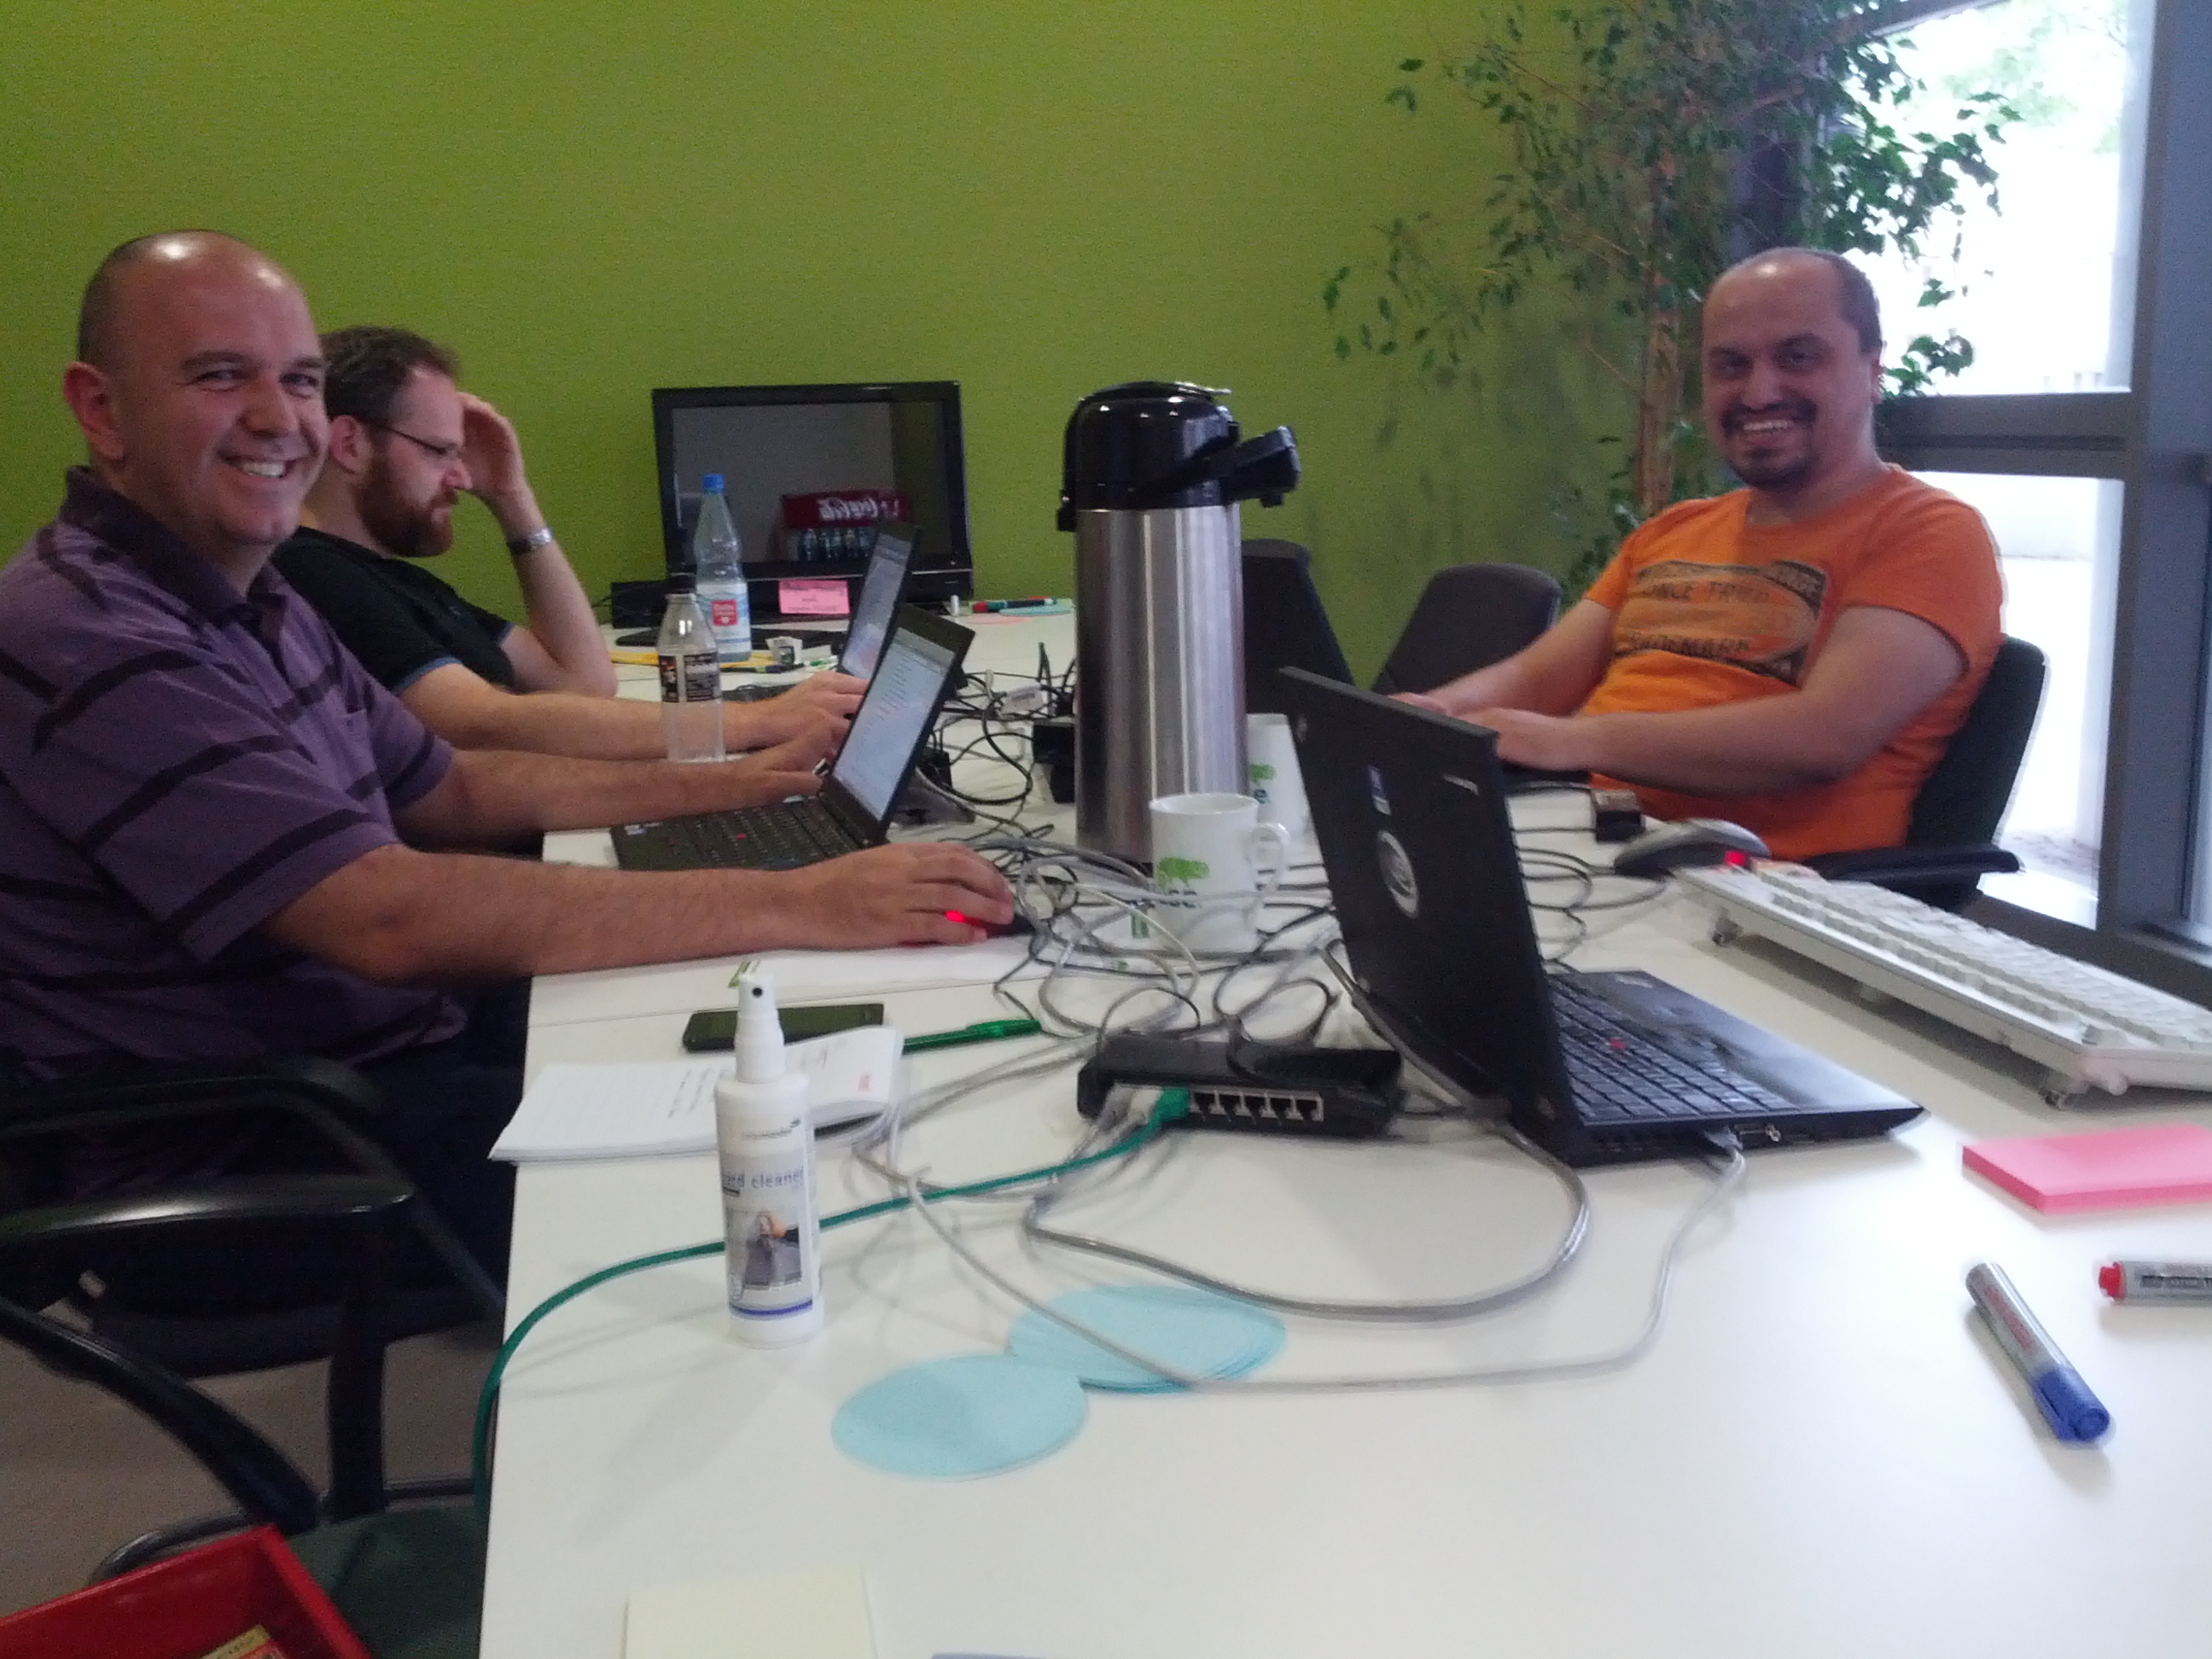 Agustin, Ismael and Christopher working around a table on openSUSE release PR